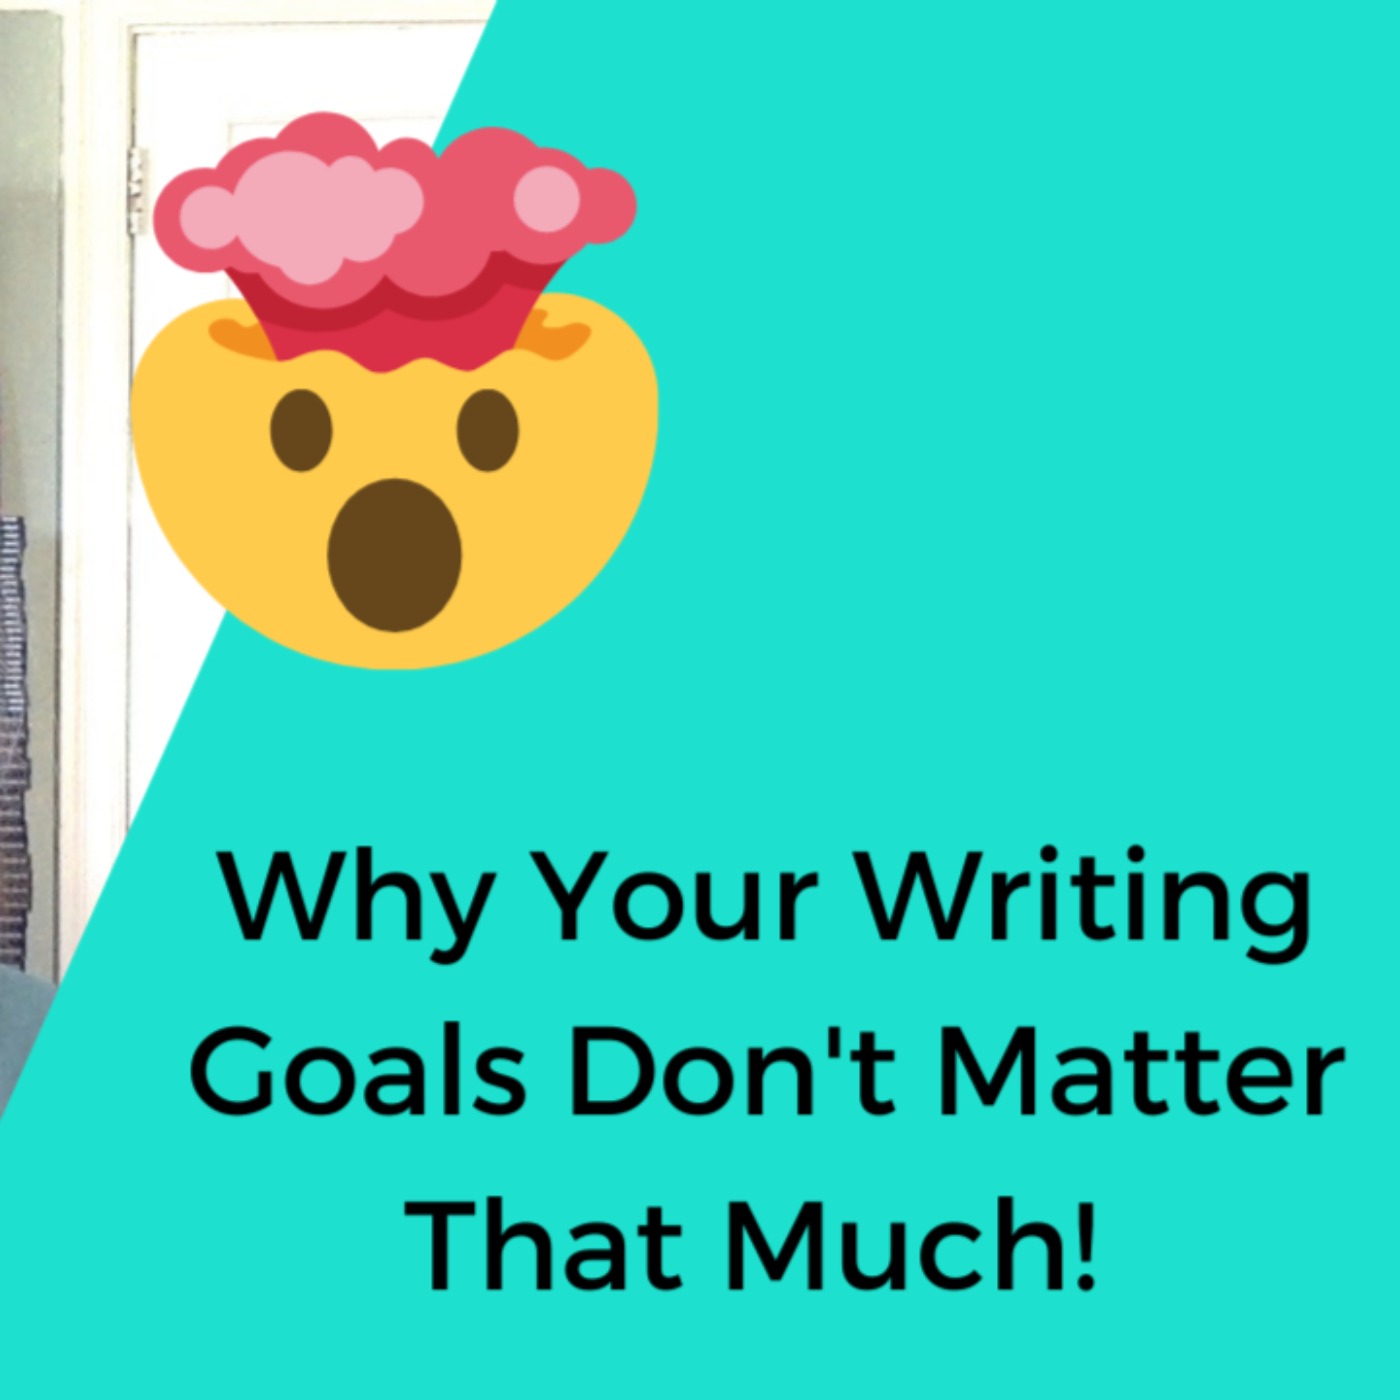 Ep: 233: Why Your Writing Goals Don't Matter That Much!